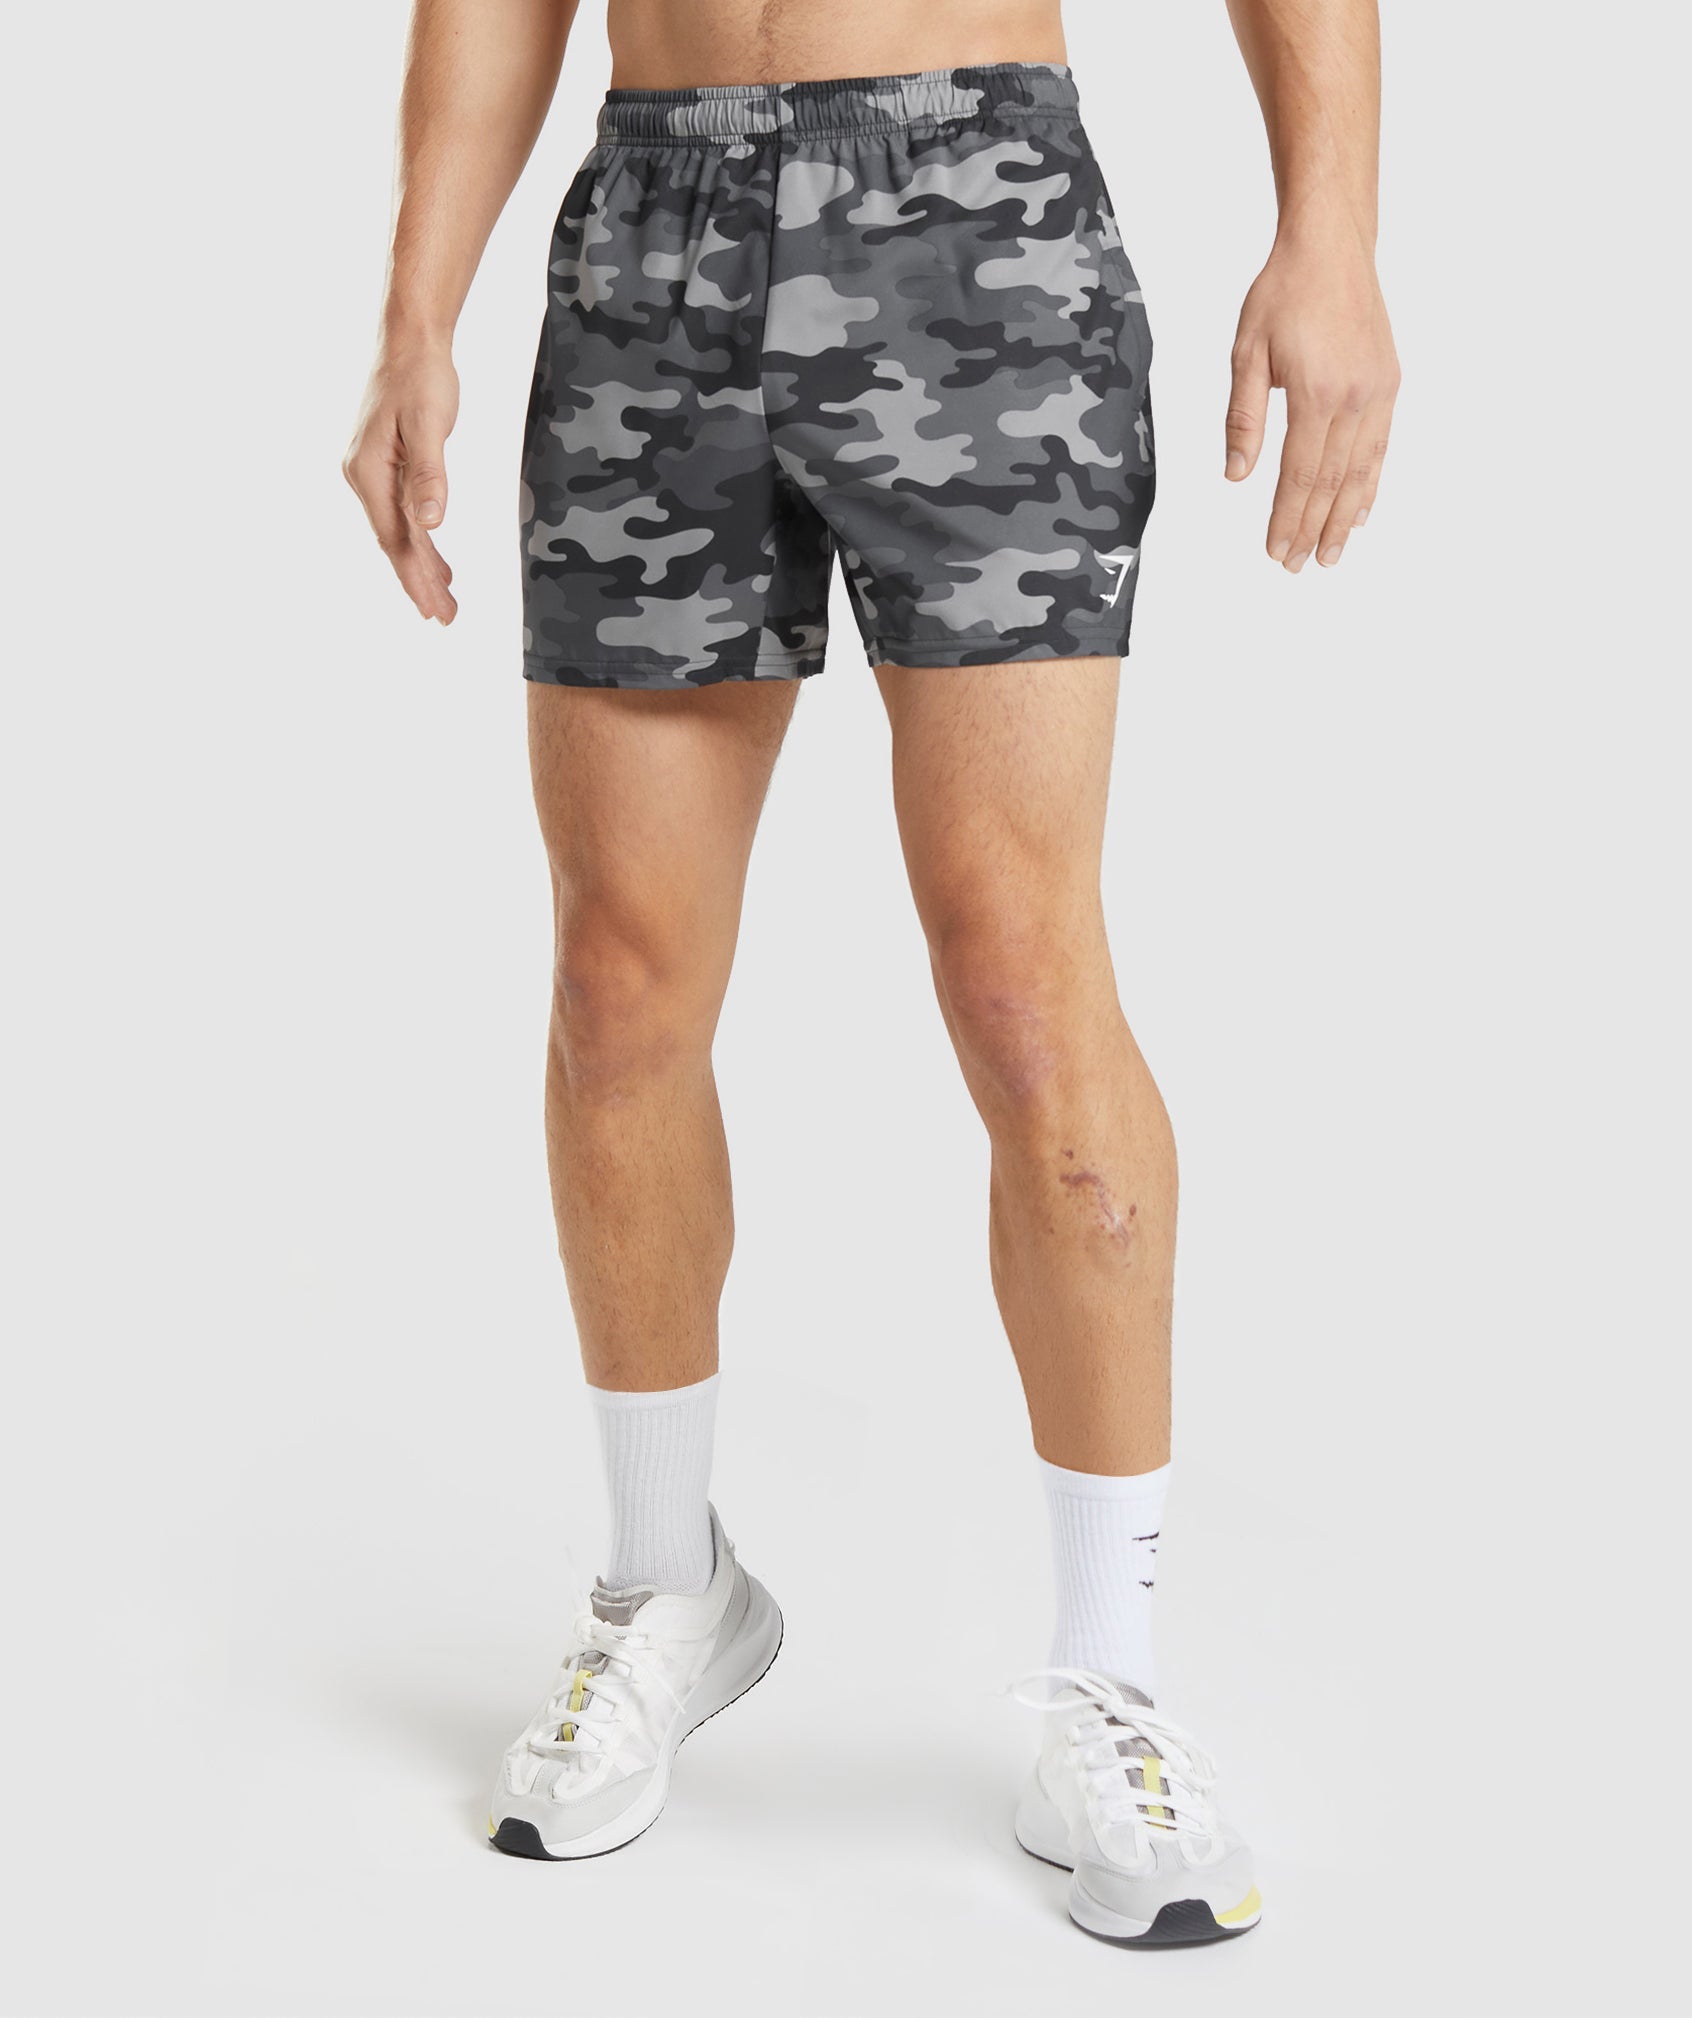 Arrival 5" Shorts in Grey Print - view 1